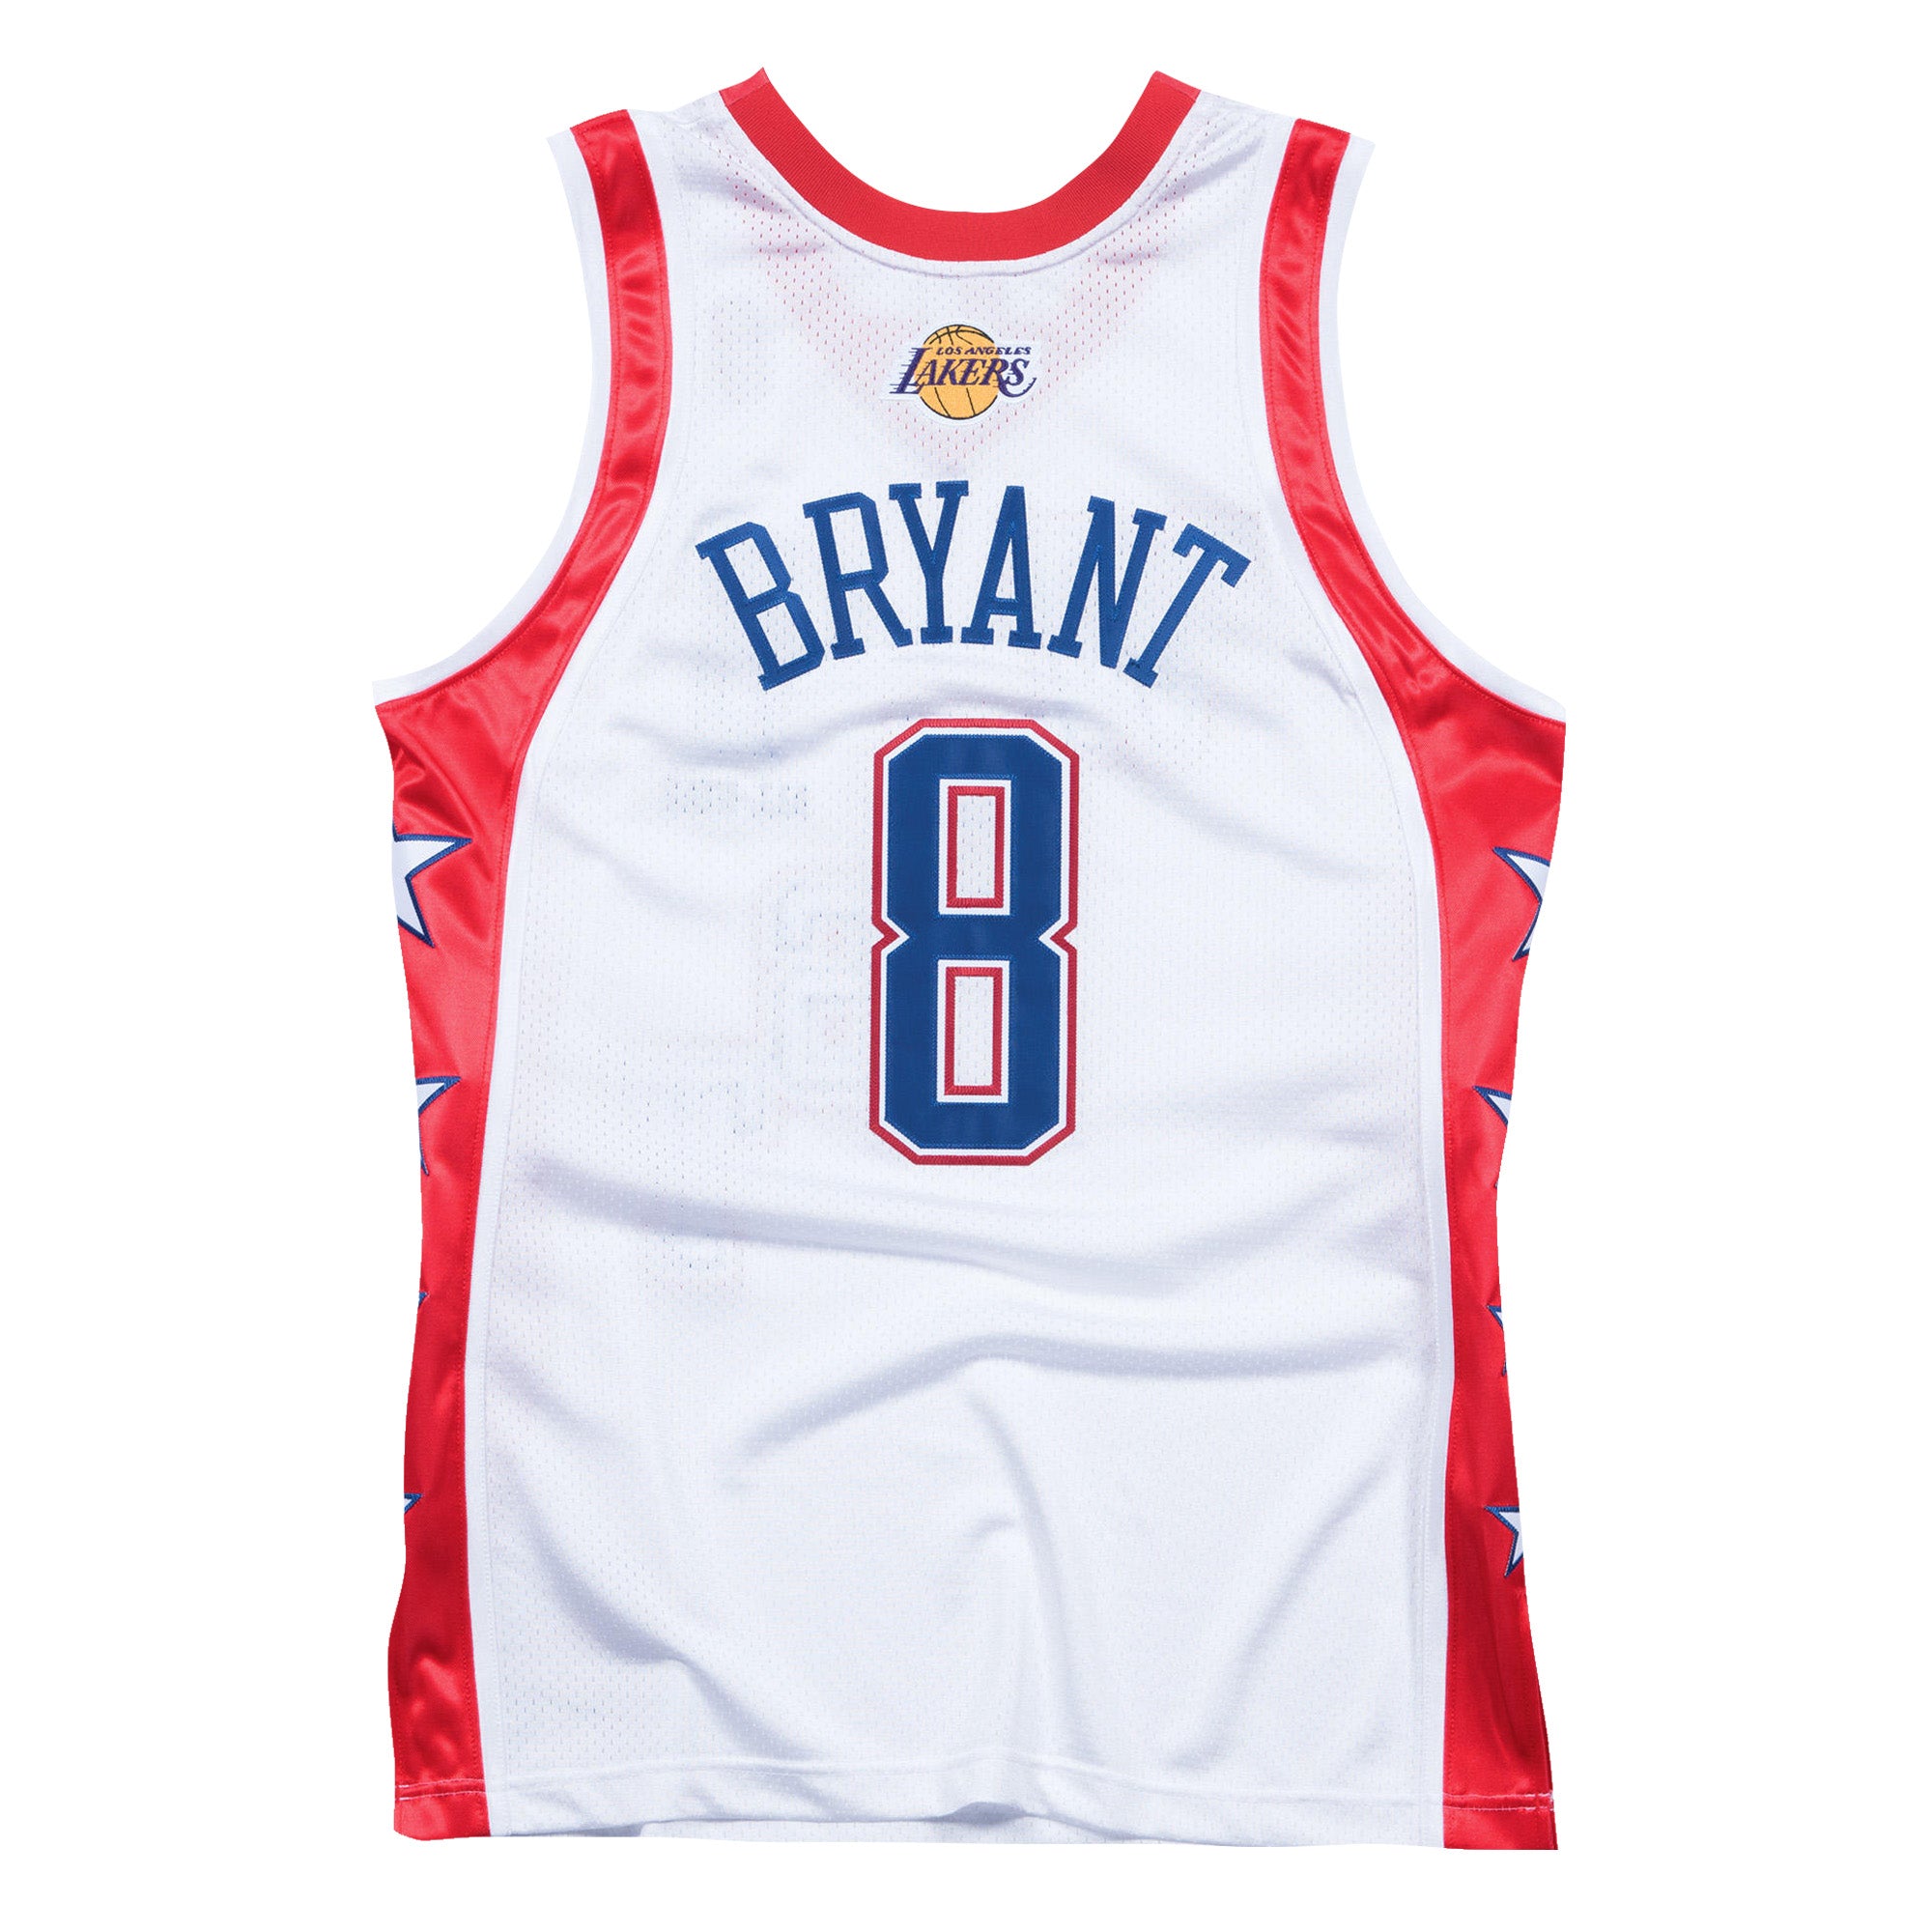 bryant all star jersey